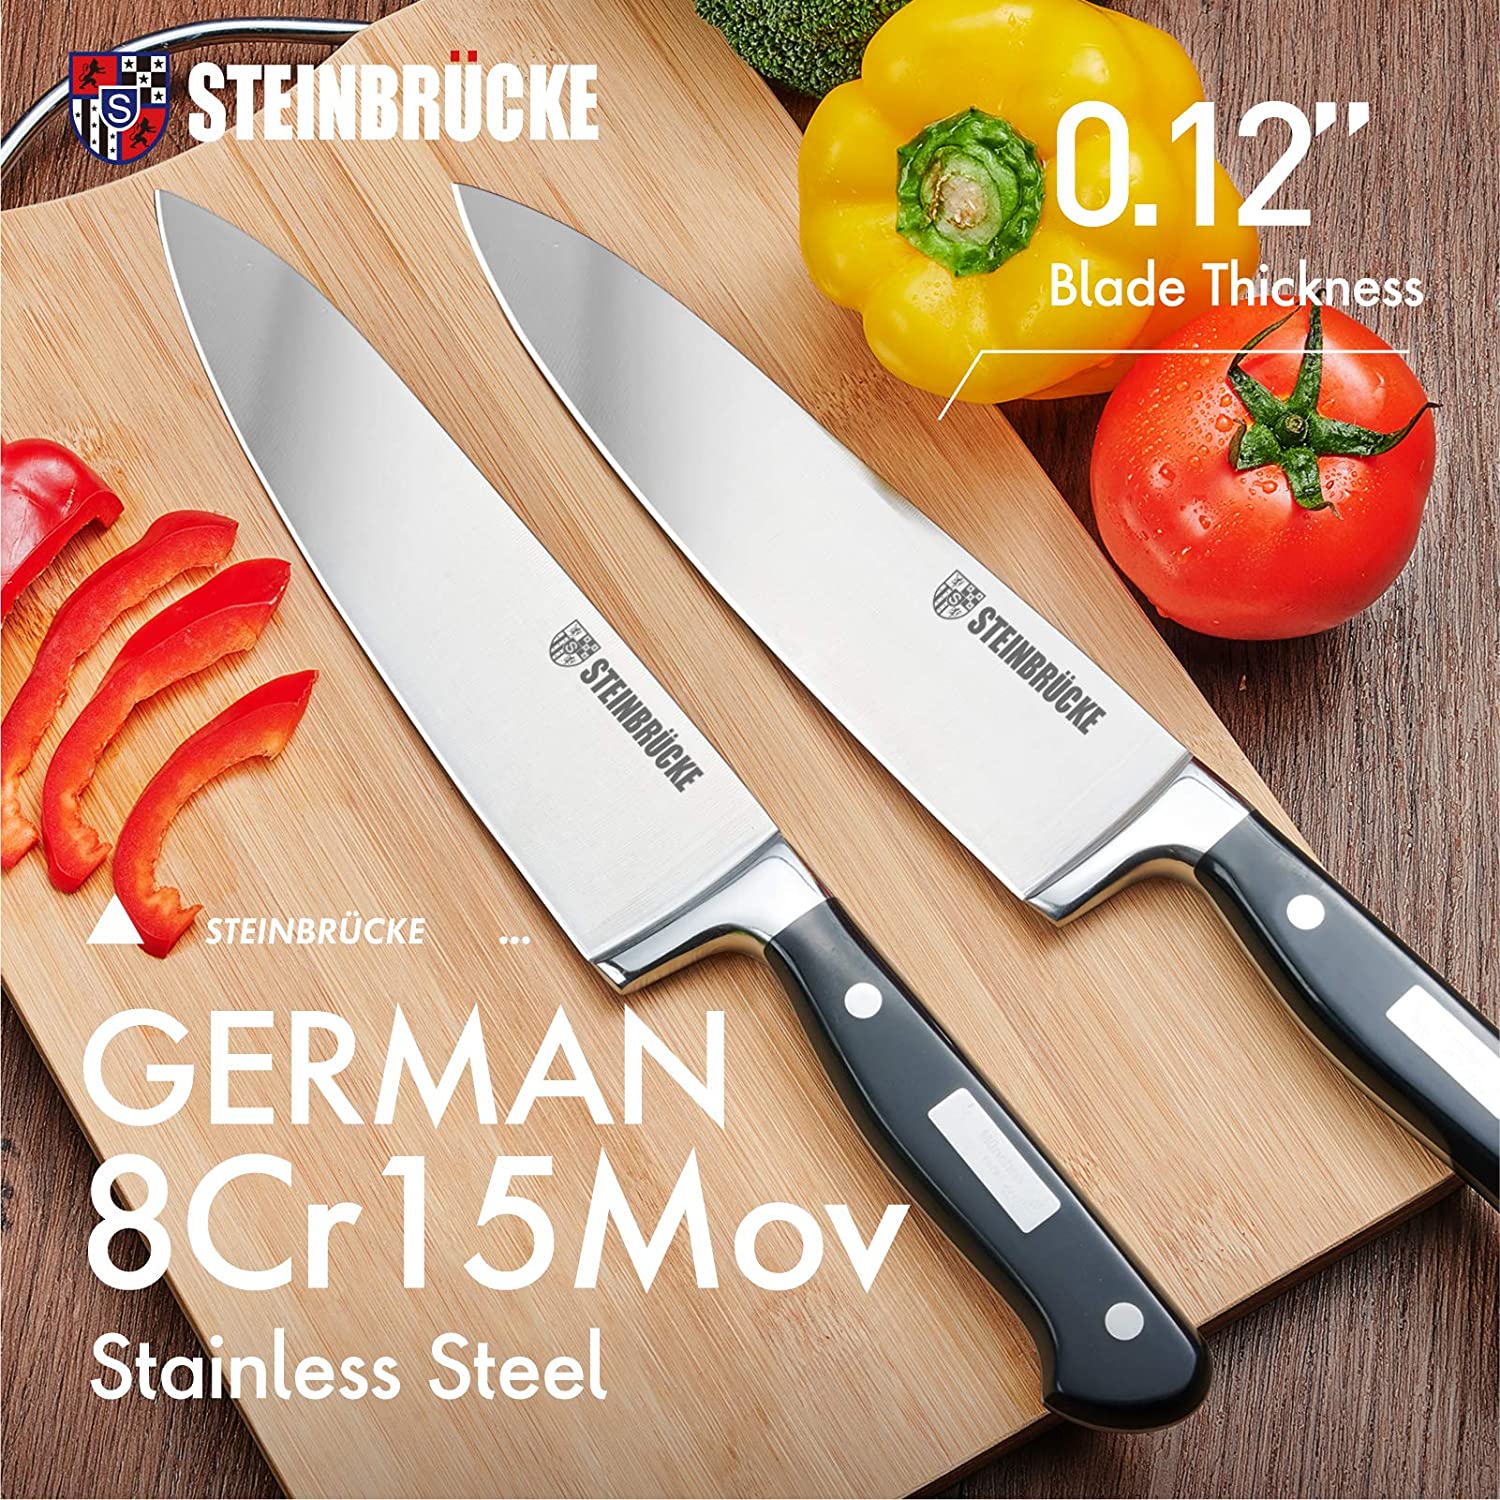 8-inch Chef's Knife Pro Forged